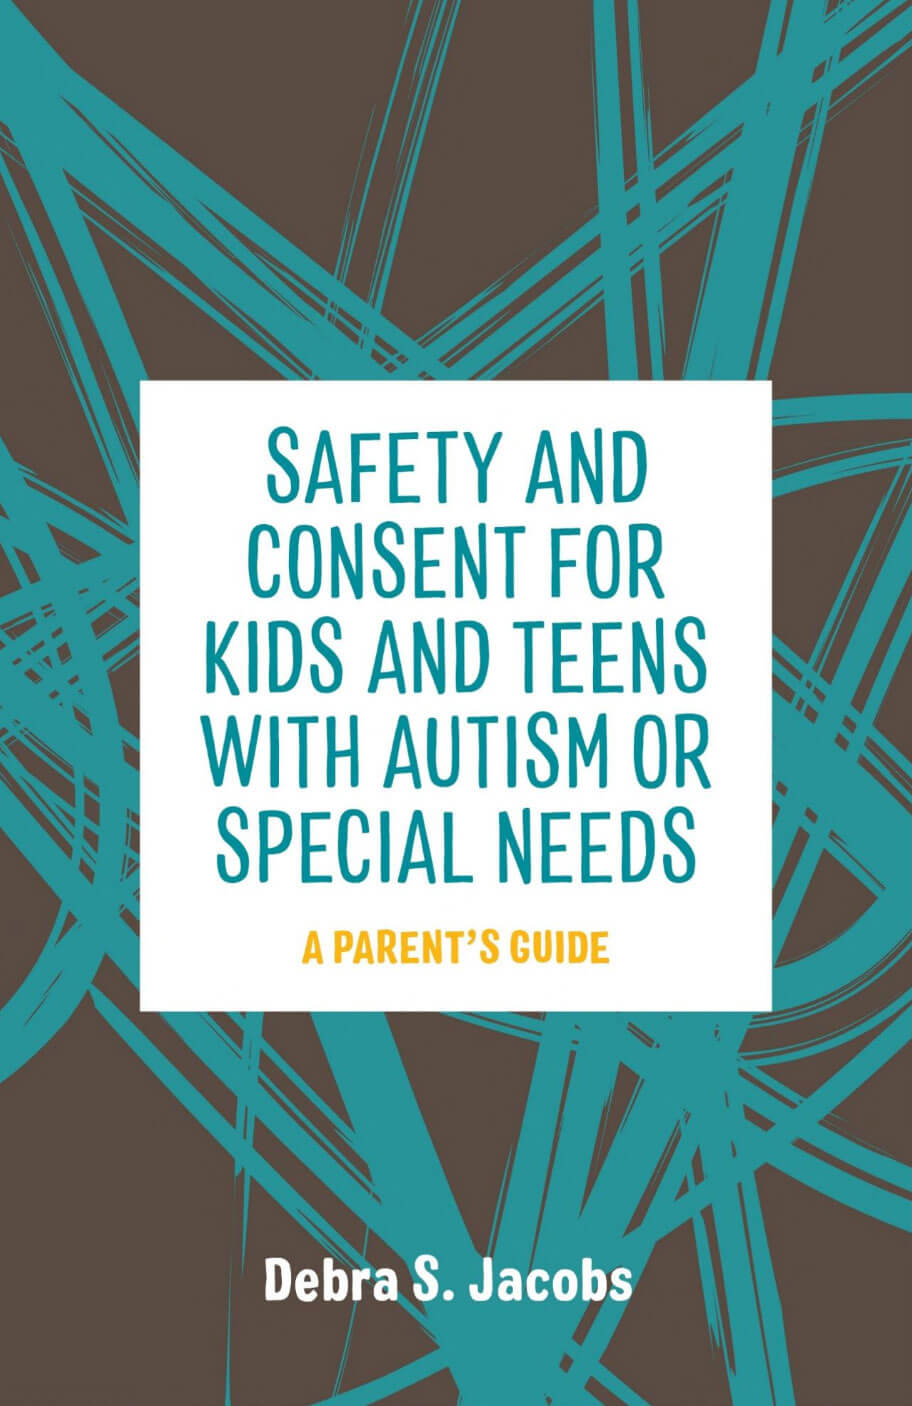 Safety and Consent for Kids and Teens with Autism or Special Needs - A Parents' Guide